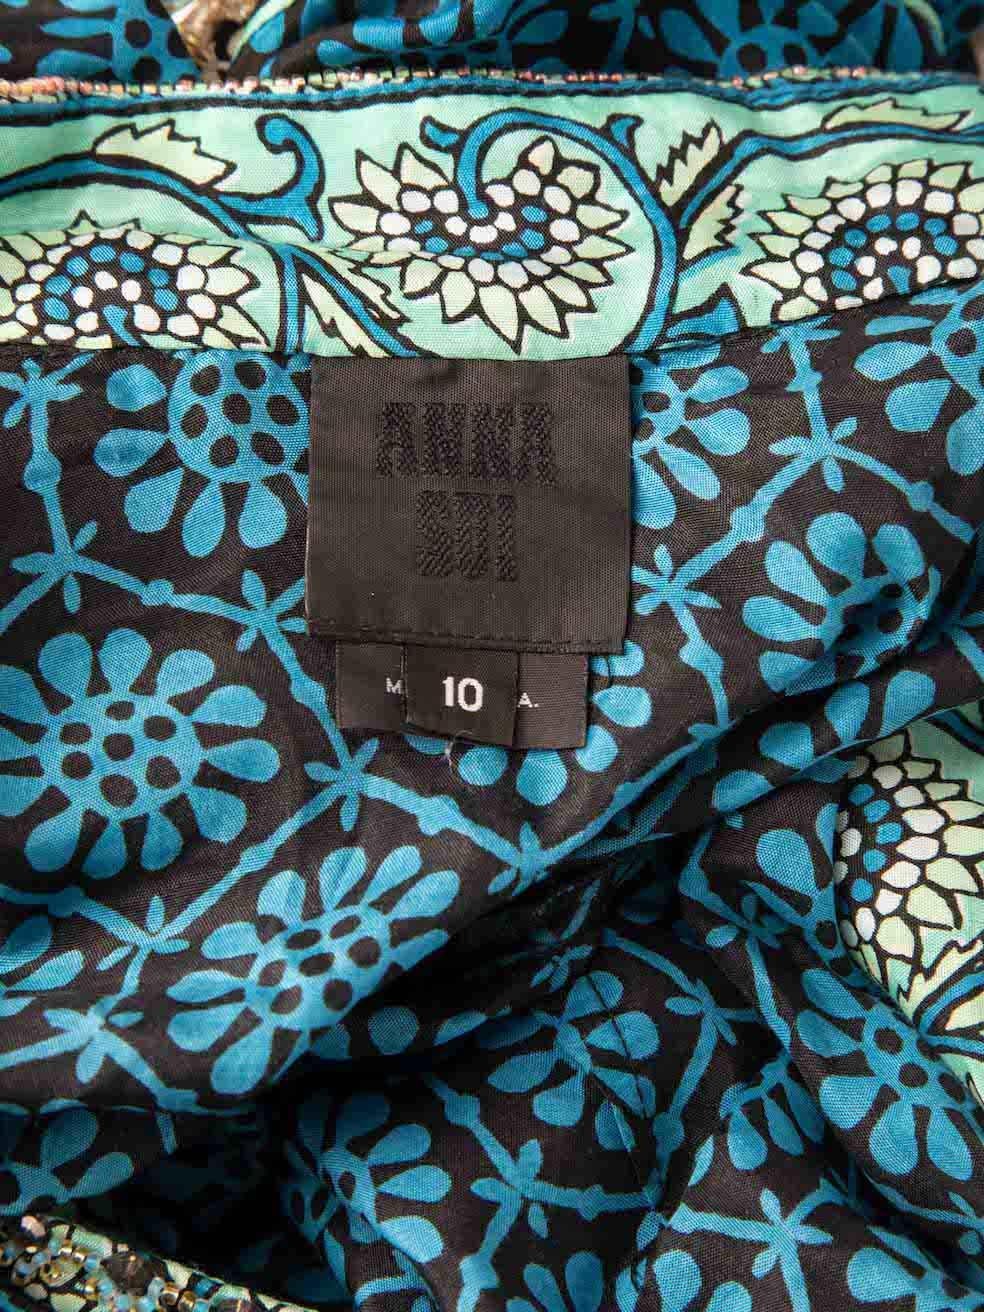 Women's Anna Sui Bead Embellished Pattern Tunic Top Size XL